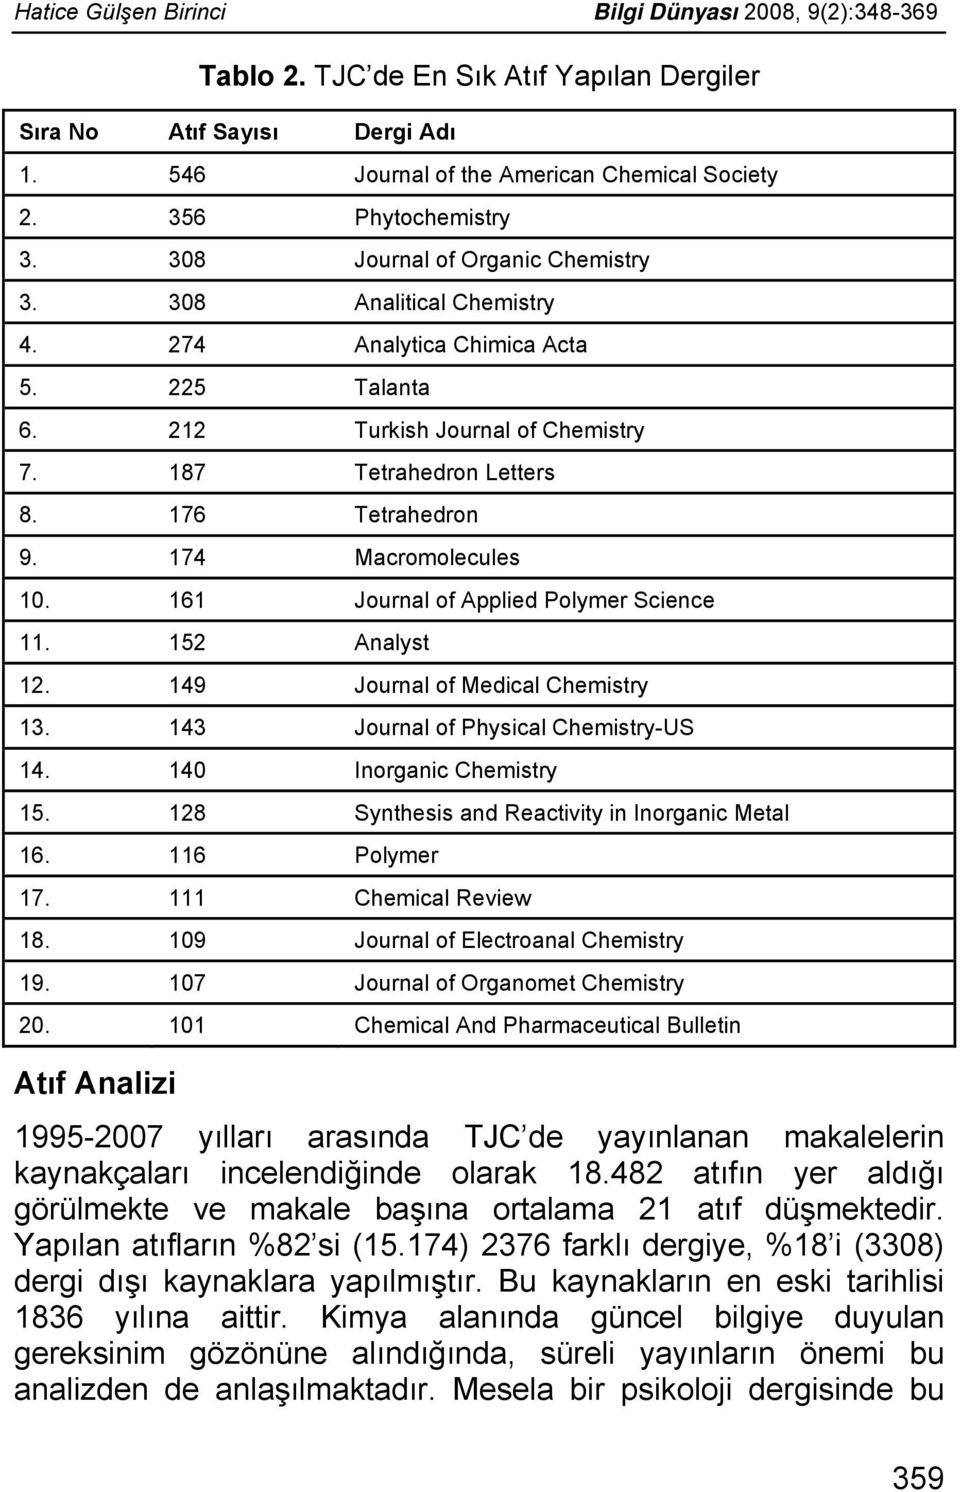 176 Tetrahedron 9. 174 Macromolecules 10. 161 Journal of Applied Polymer Science 11. 152 Analyst 12. 149 Journal of Medical Chemistry 13. 143 Journal of Physical Chemistry-US 14.